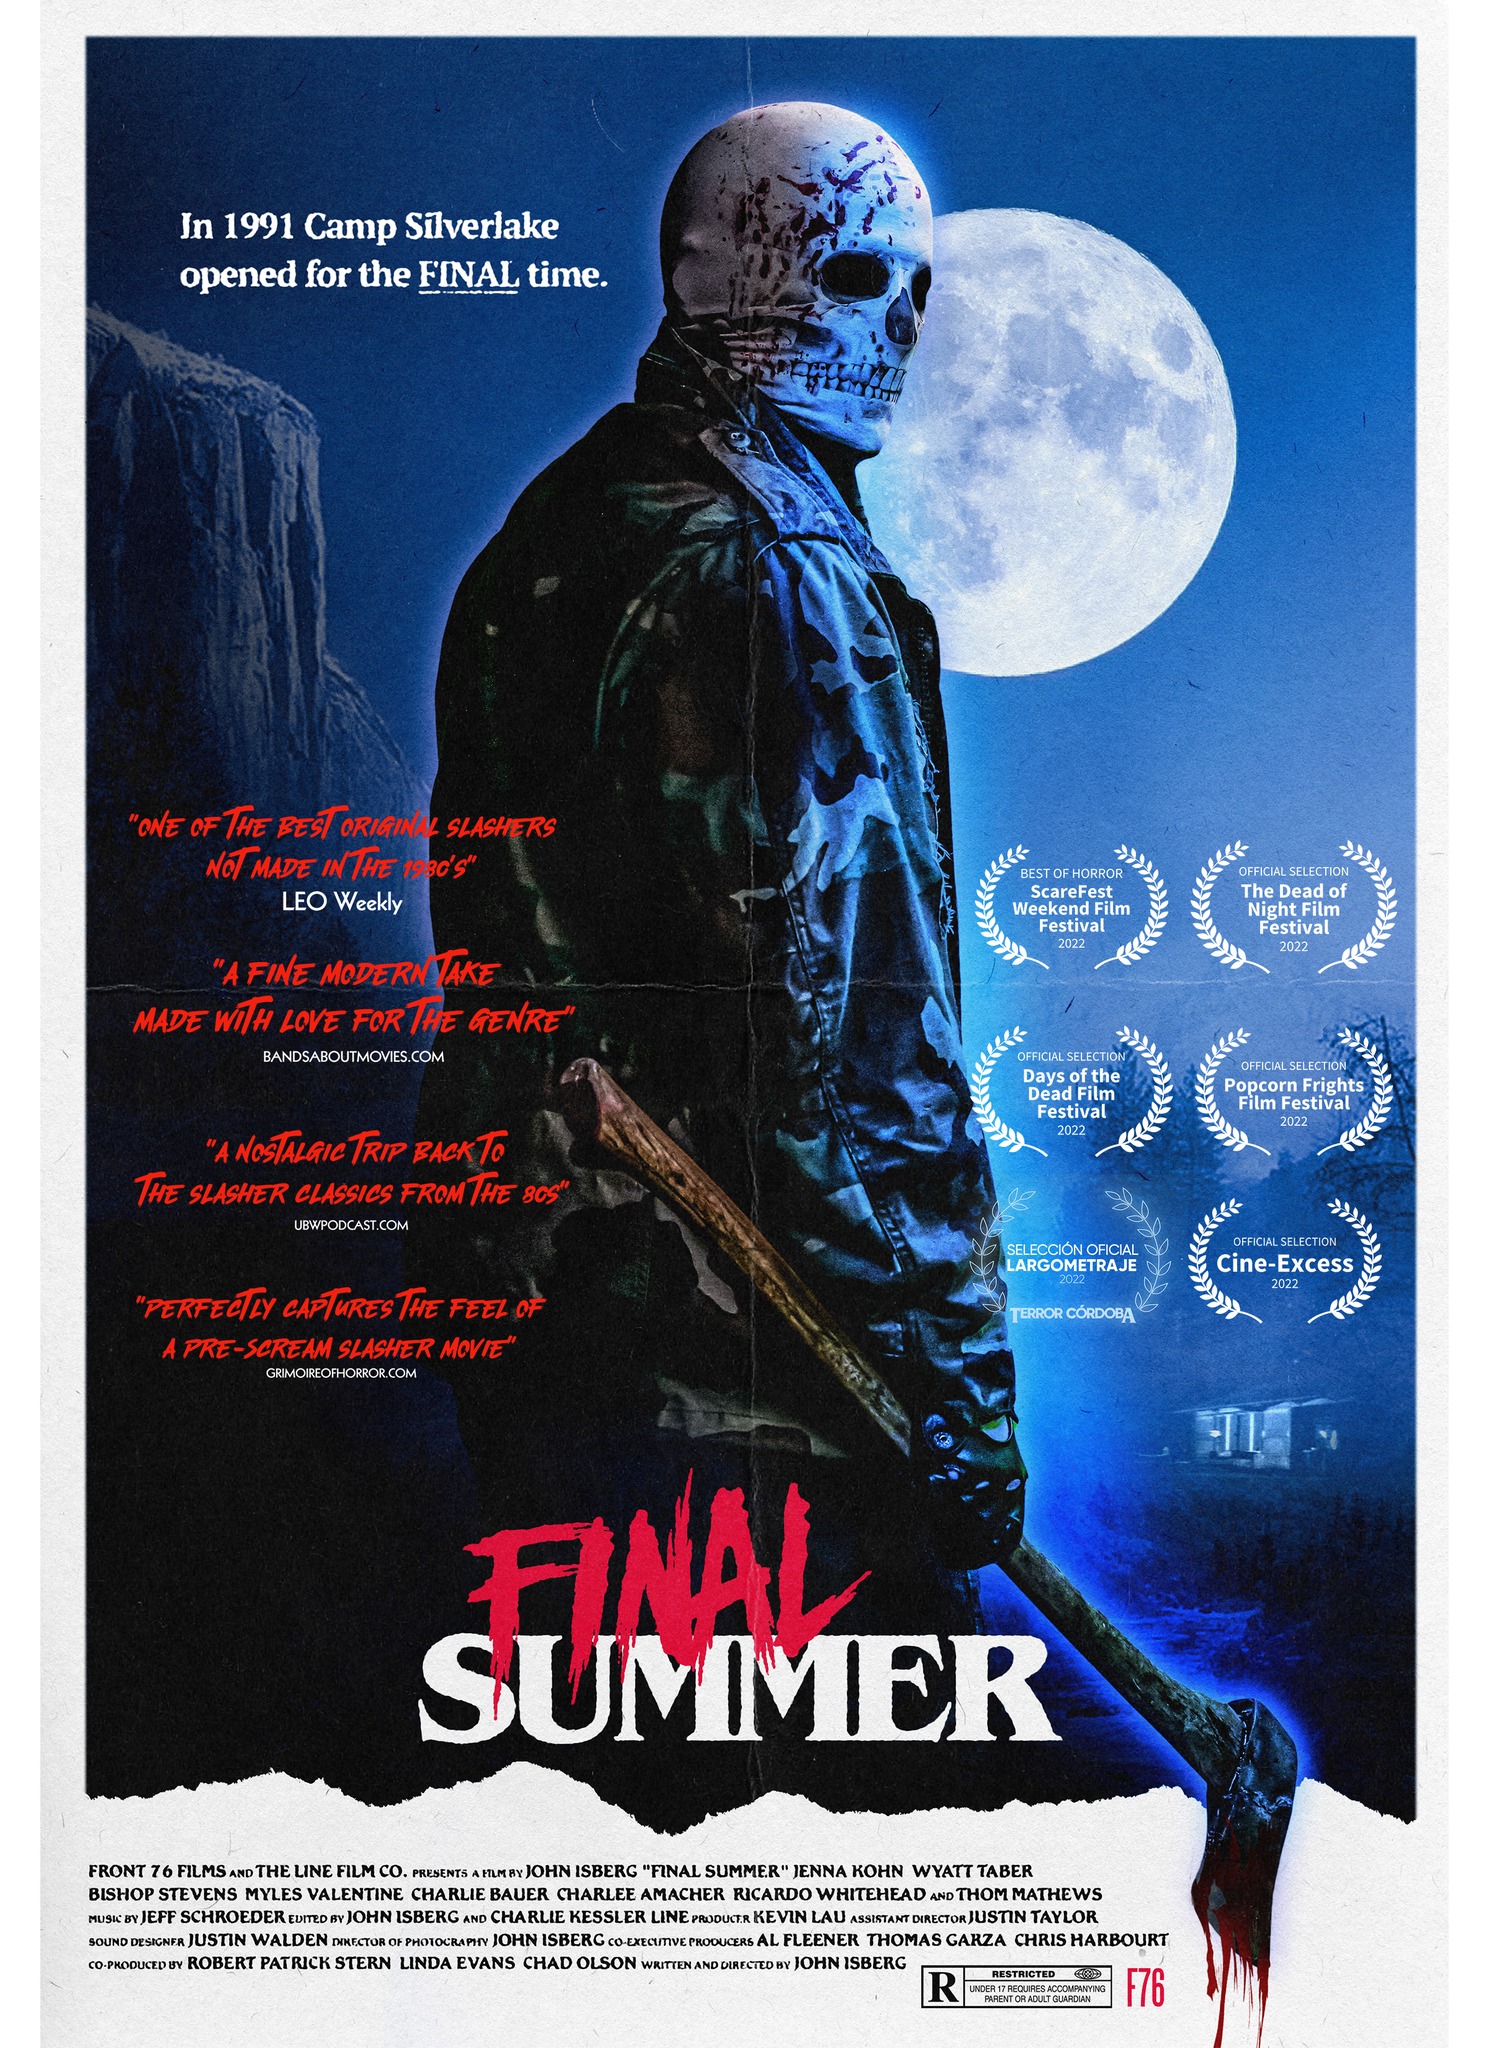 Movie poster for Final Summer. A person wearing a skull mask with blood on the face is pictured in profile. They are wearing a dark coat and carrying a bloody ax in their right hand. There is red text over the image. Image from Final Summer's Facebook page. 